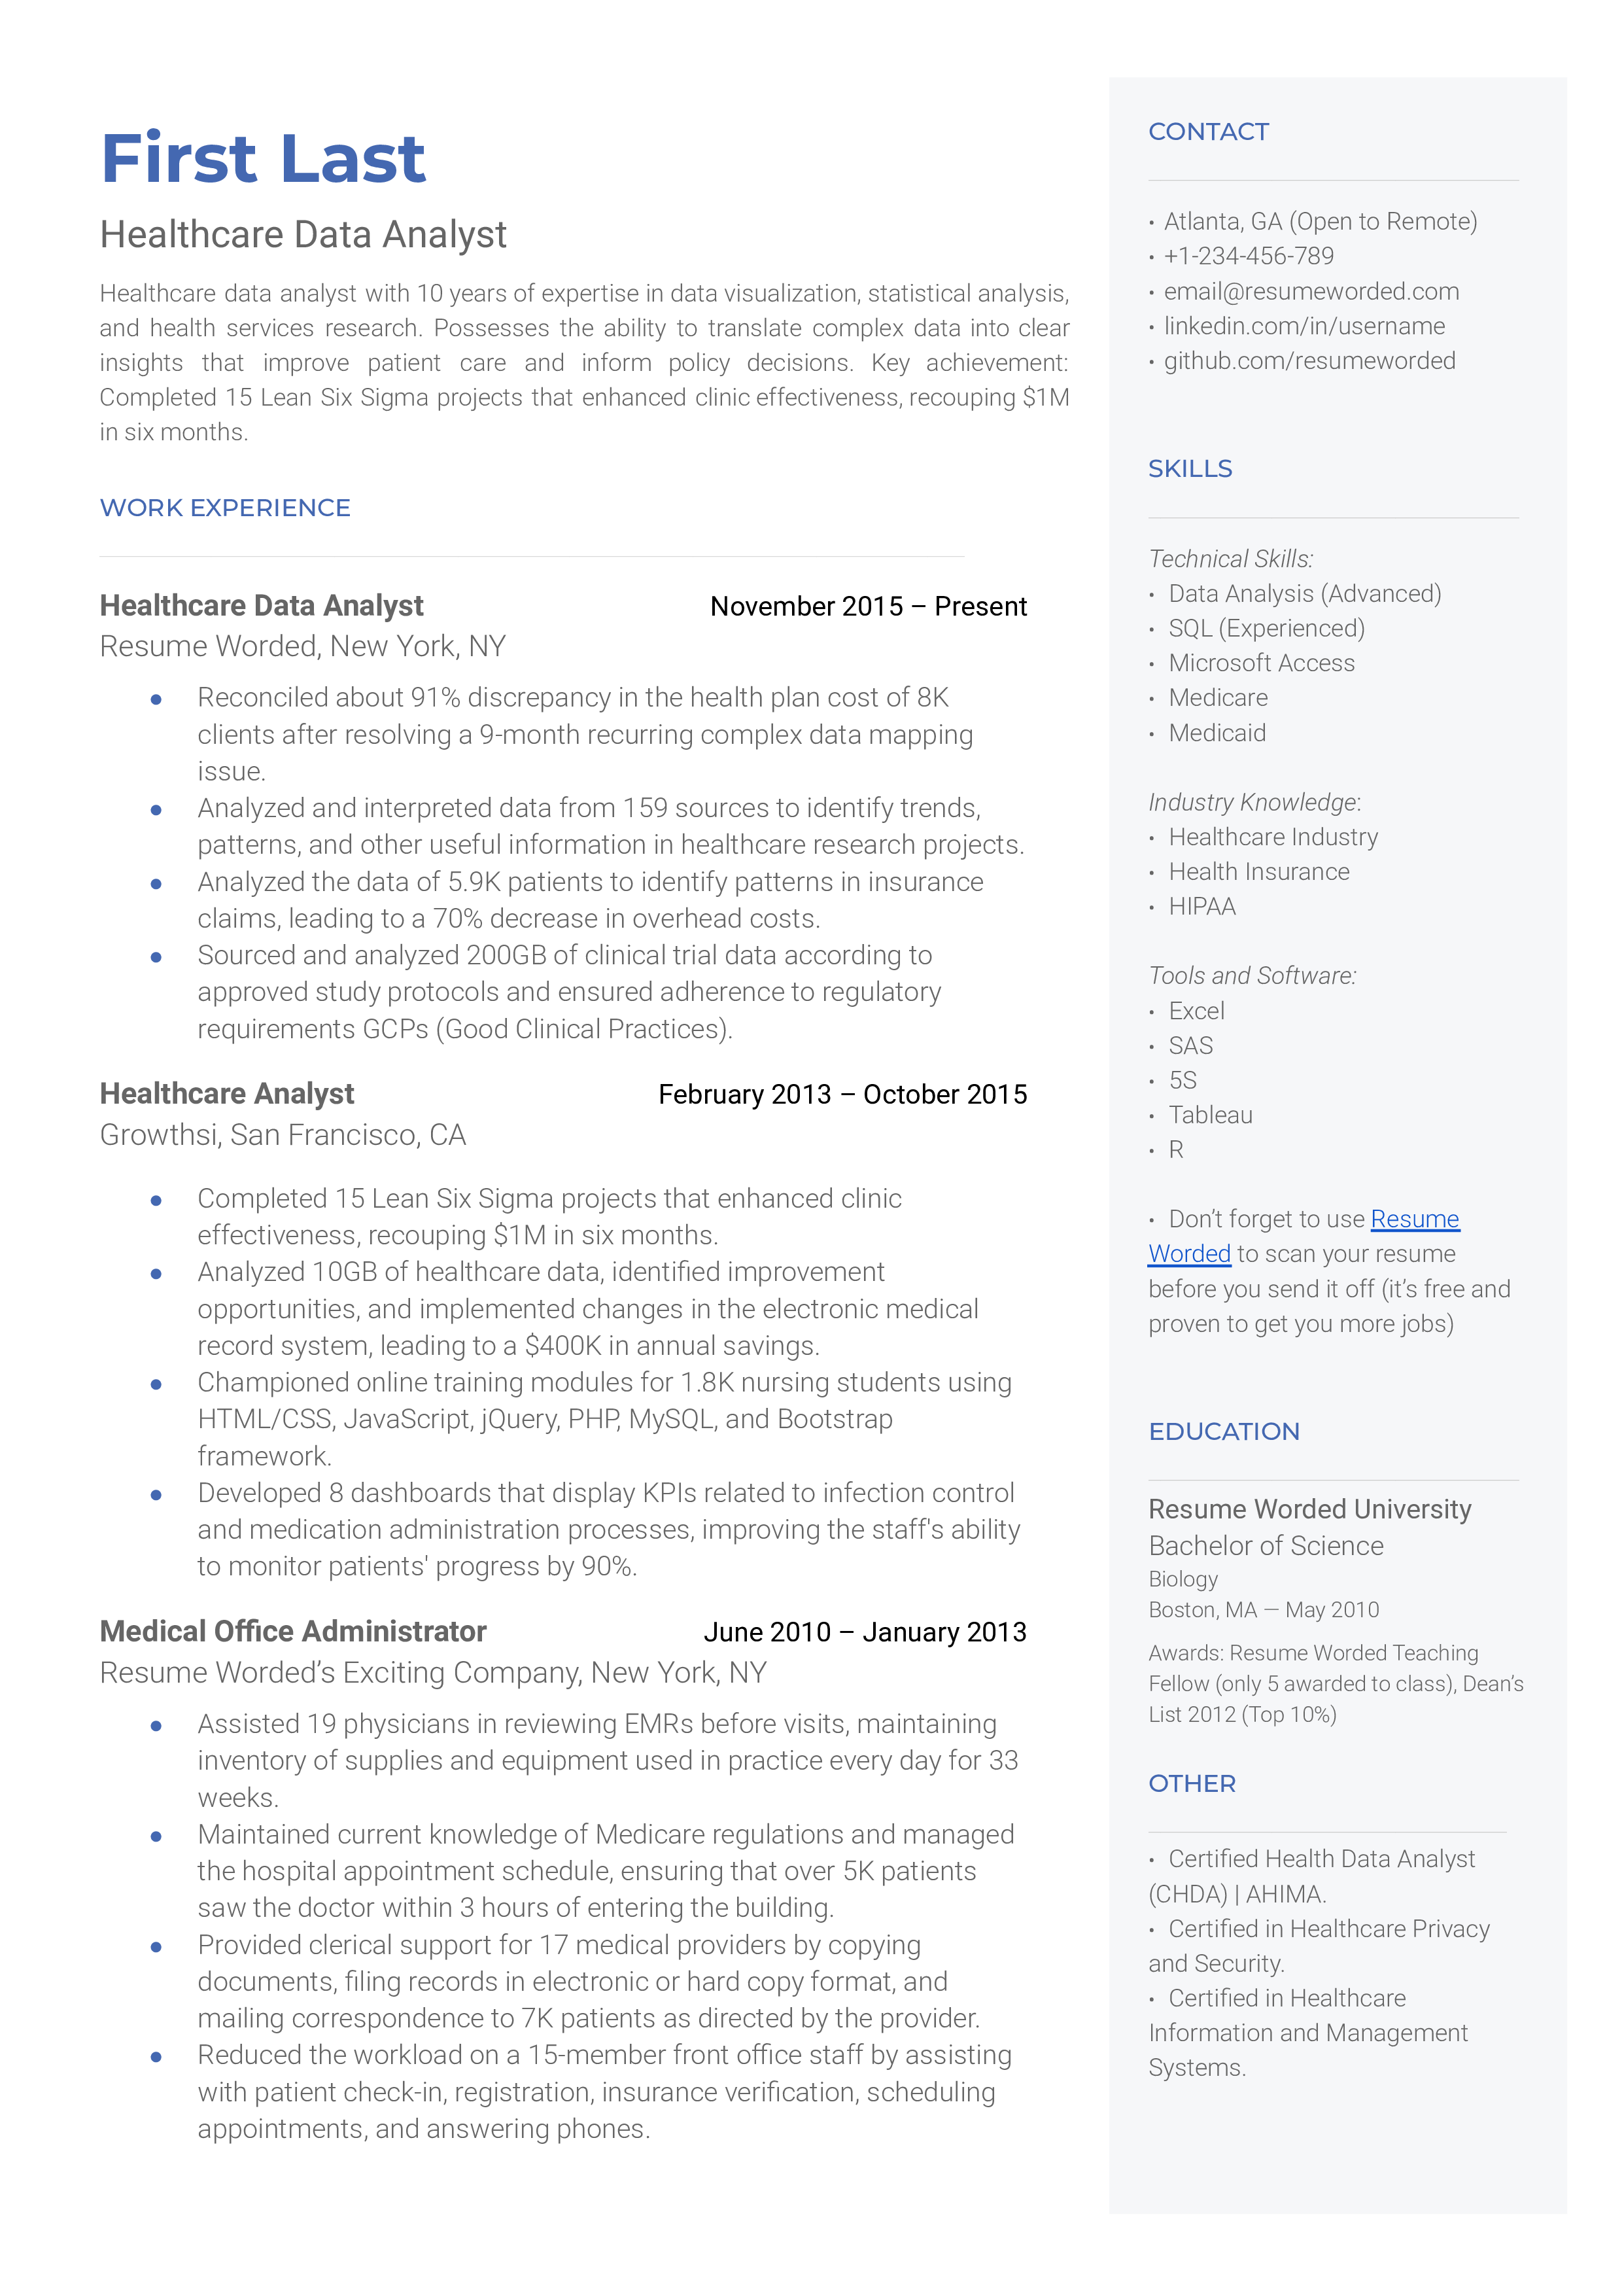 A healthcare data analyst resume sample  that highlights applicant's healthcare knowledge and certifications.